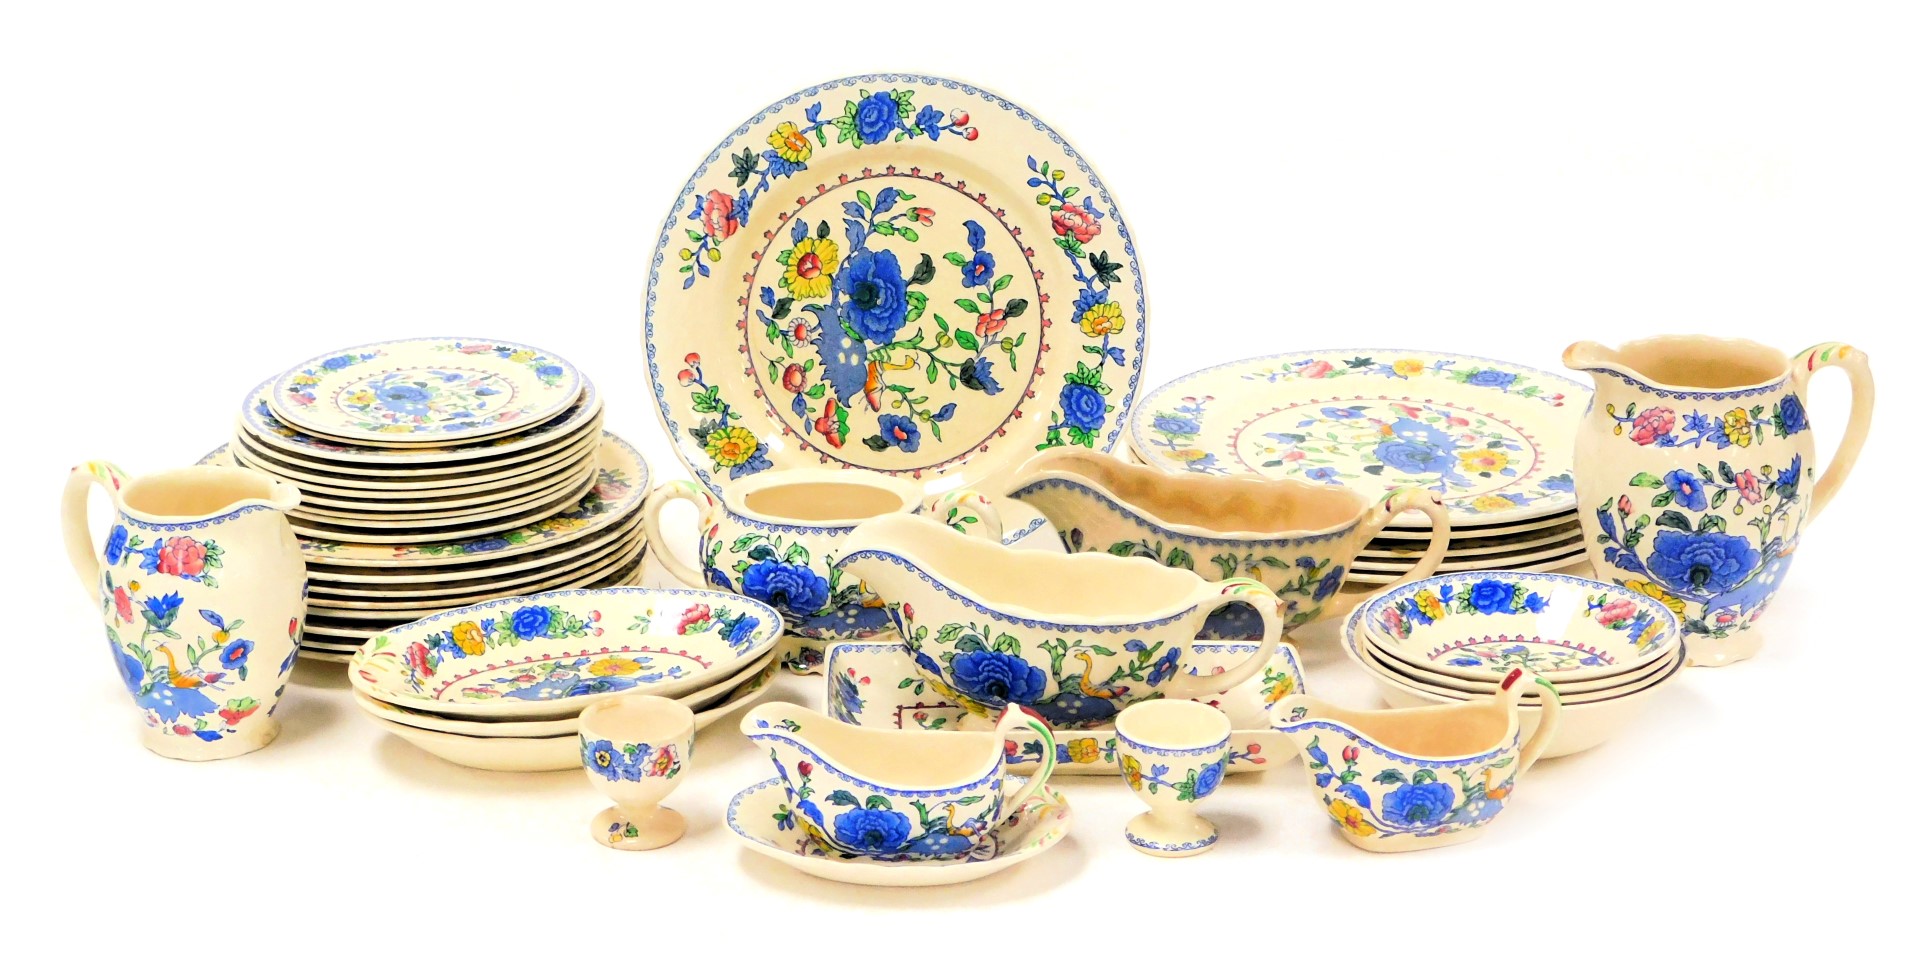 A group of Masons Regency pattern dinner wares, including sauce and gravy boats, dinner, dessert and